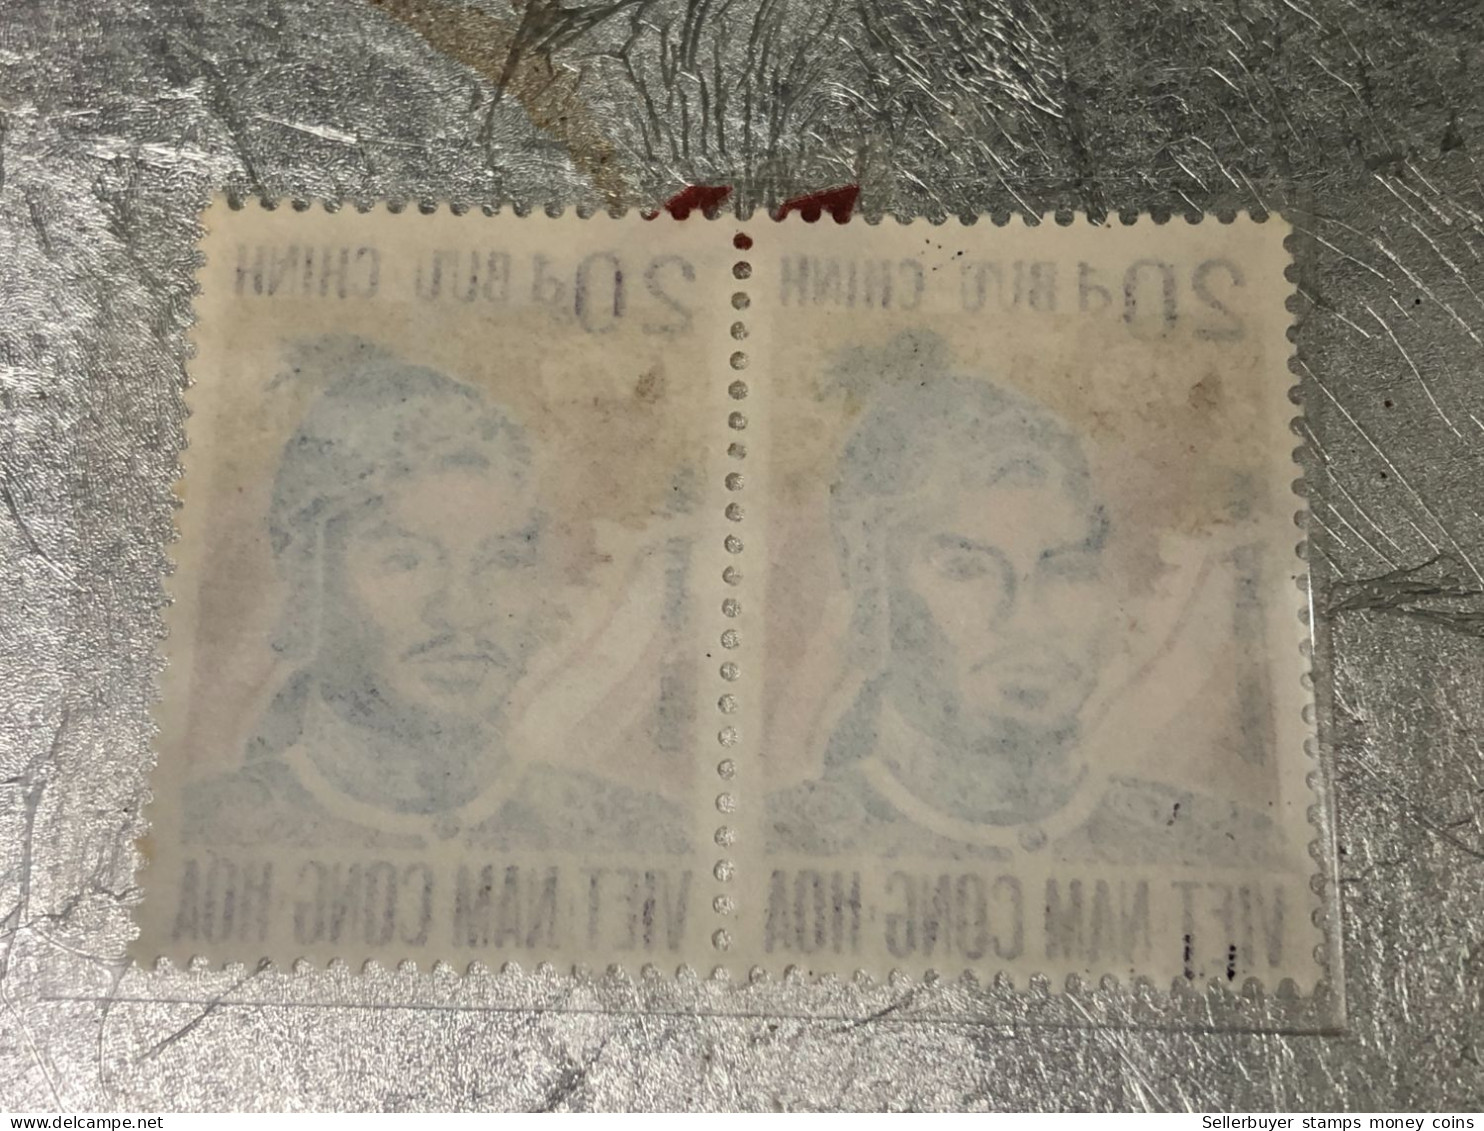 VIET NAM SOUTH STAMPS (ERROR Printed With Tip On Top  1972-20DONG )1 STAMPS Rare - Vietnam